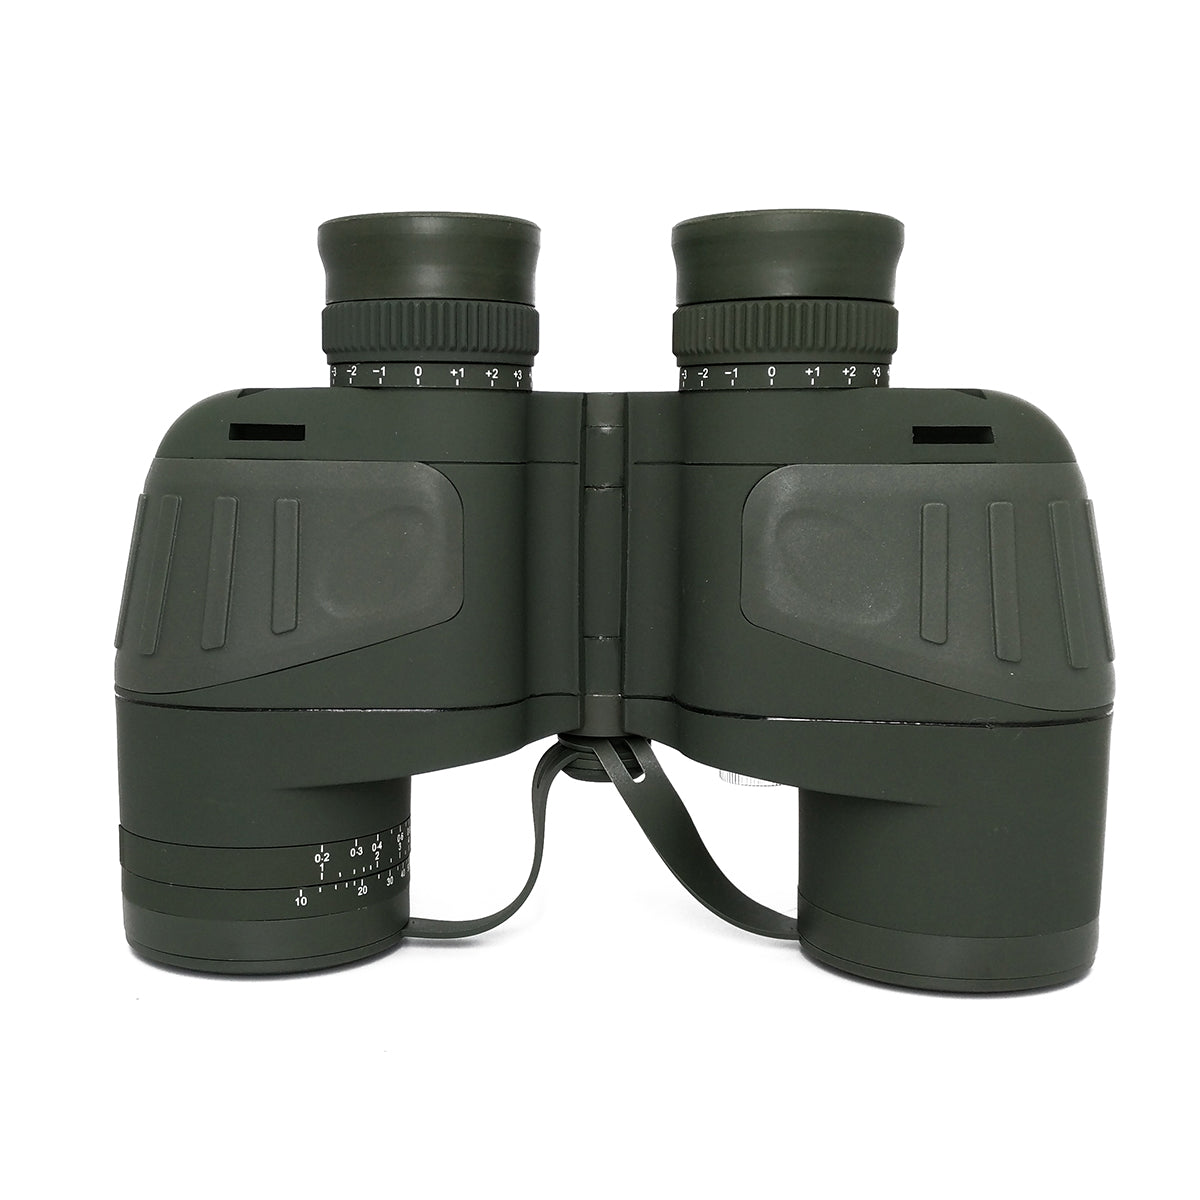 Tontube Powerful Military Binoculars 10x50 Professional with Rangefinder Compass for Hunting